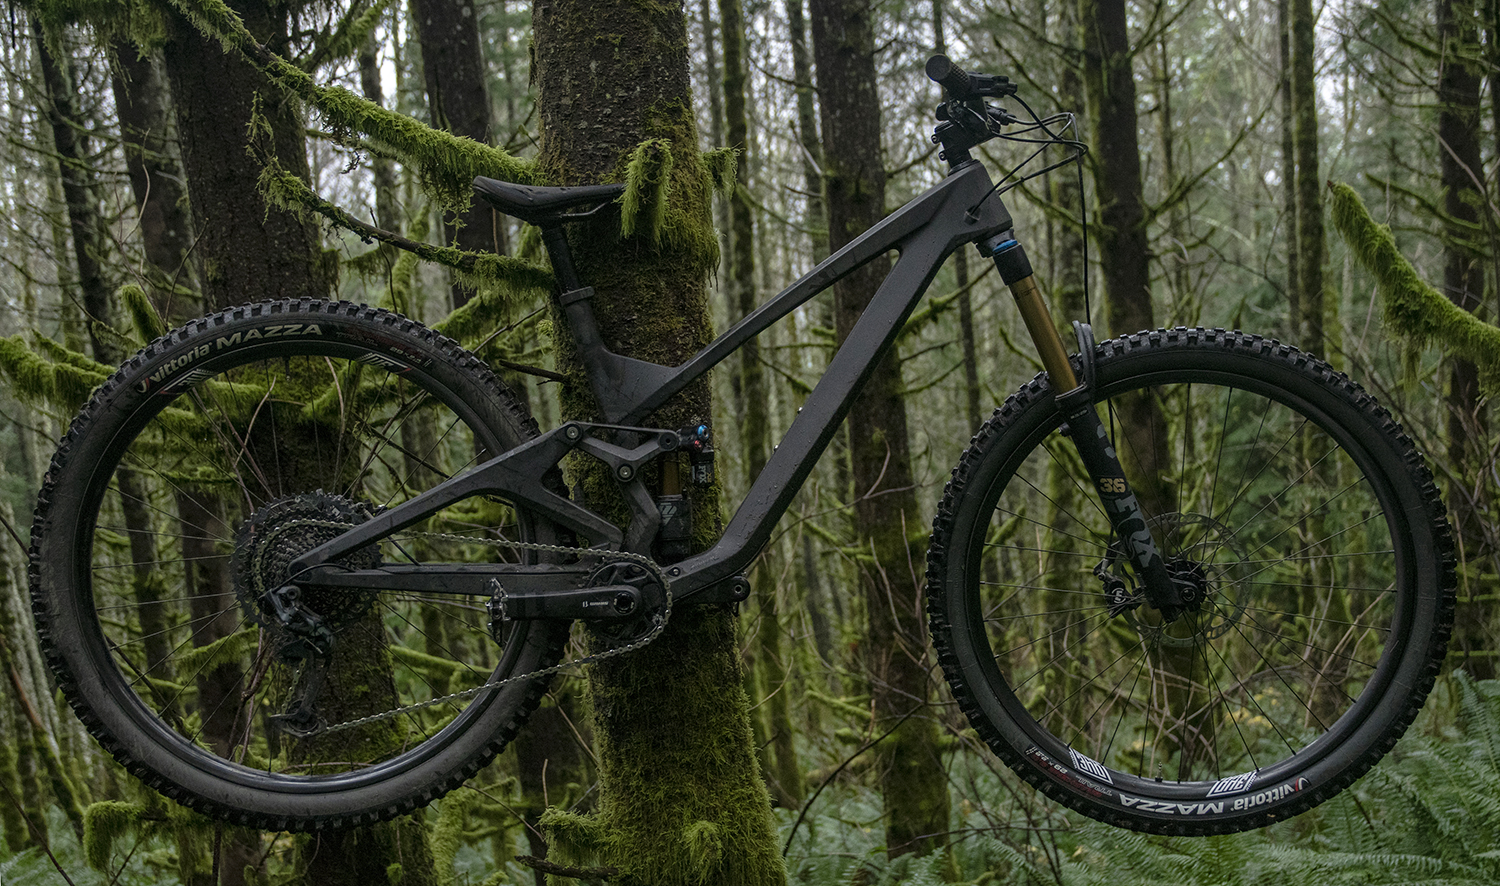 David Golay Blister mountain bike review on the We Are One Arrival